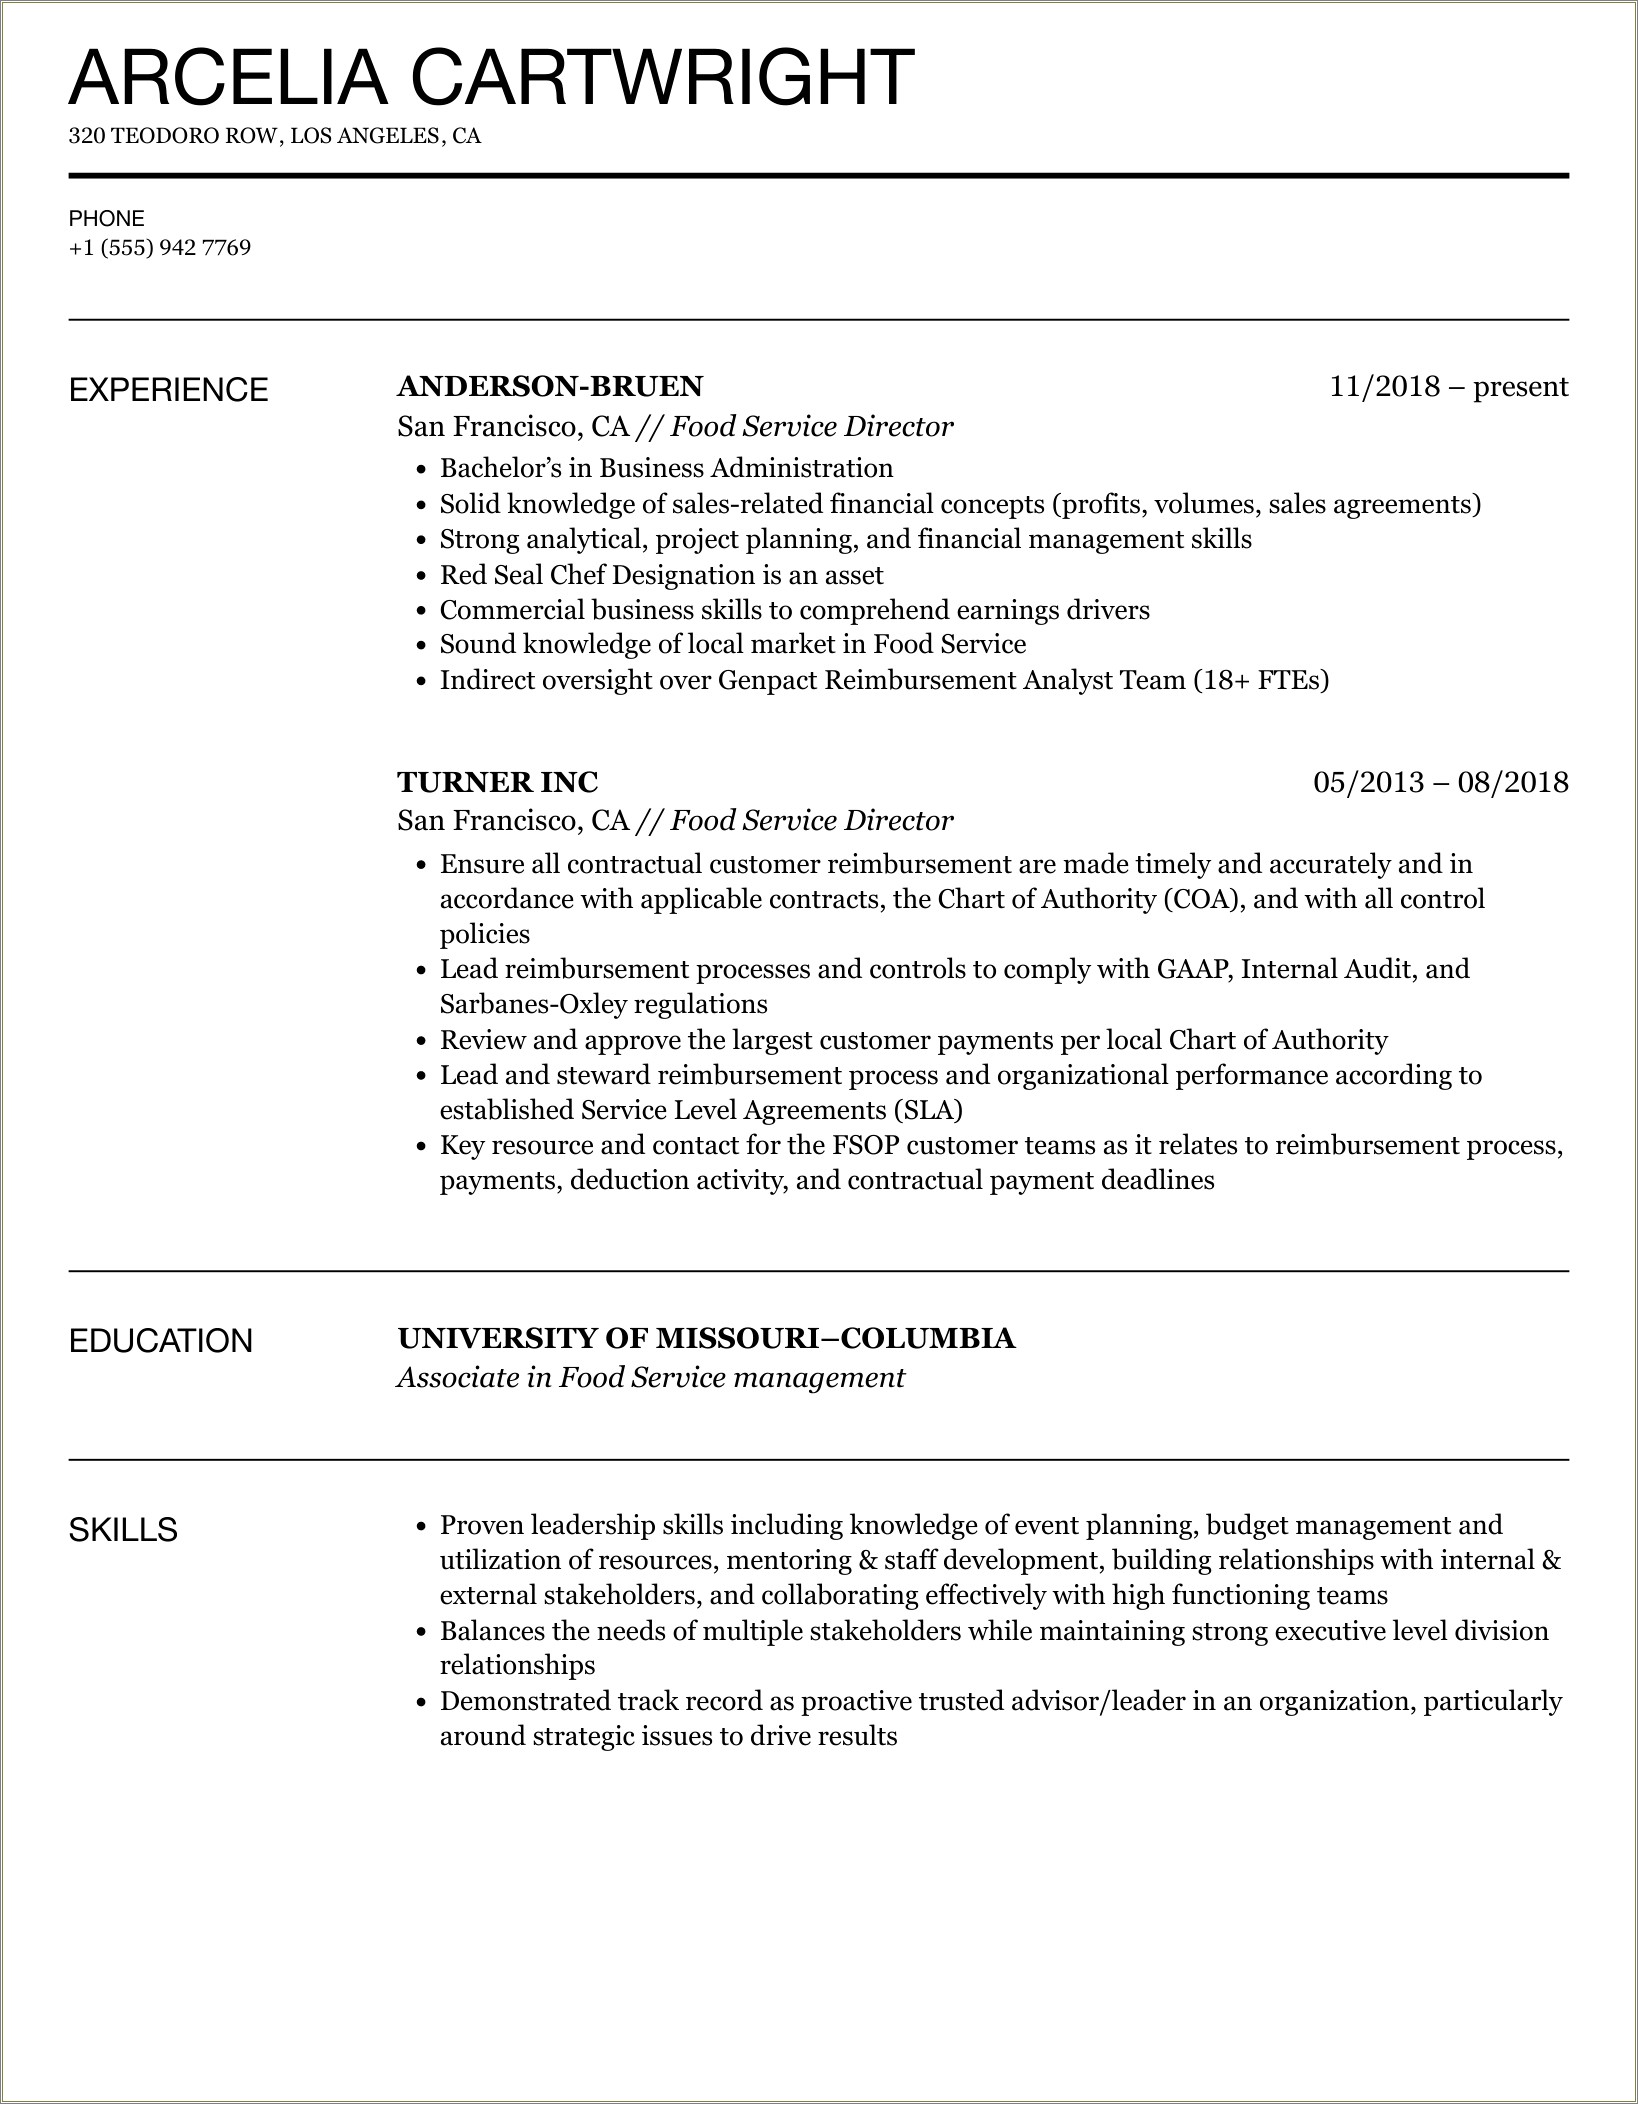 Sample Resume For Food Service Professional